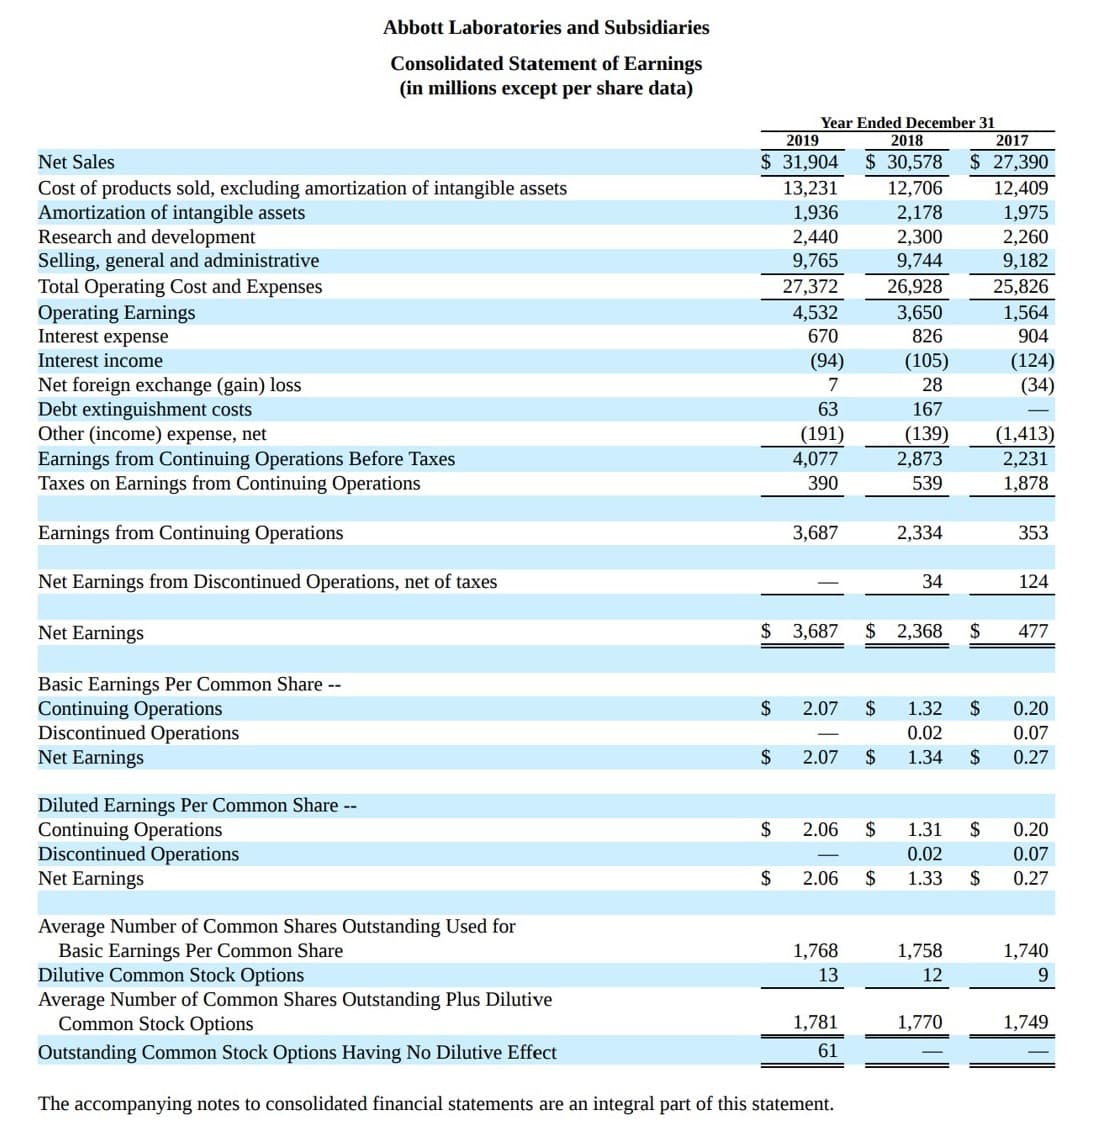 Abbott Laboratories and Subsidiaries
Consolidated Statement of Earnings
(in millions except per share data)
Year Ended December 31
2019
2018
2017
Net Sales
$ 31,904
$ 30,578
$ 27,390
Cost of products sold, excluding amortization of intangible assets
Amortization of intangible assets
Research and development
Selling, general and administrative
Total Operating Cost and Expenses
Operating Earnings
Interest expense
13,231
1,936
2,440
9,765
12,706
2,178
2,300
9,744
12,409
1,975
2,260
9,182
27,372
4,532
670
26,928
25,826
3,650
1,564
826
904
(105)
28
(124)
(34)
Interest income
(94)
Net foreign exchange (gain) loss
Debt extinguishment costs
Other (income) expense, net
Earnings from Continuing Operations Before Taxes
Taxes on Earnings from Continuing Operations
7
63
167
(191)
4,077
(139)
2,873
(1,413)
2,231
390
539
1,878
Earnings from Continuing Operations
3,687
2,334
353
Net Earnings from Discontinued Operations, net of taxes
34
124
Net Earnings
$ 3,687
$ 2,368
$
477
Basic Earnings Per Common Share --
Continuing Operations
Discontinued Operations
Net Earnings
$
2.07
$
1.32
$
0.20
0.02
0.07
2$
2.07
2$
1.34
$
0.27
Diluted Earnings Per Common Share --
Continuing Operations
Discontinued Operations
Net Earnings
$
2.06
$
1.31
$
0.20
0.02
0.07
2$
2.06
$
1.33
$
0.27
Average Number of Common Shares Outstanding Used for
Basic Earnings Per Common Share
Dilutive Common Stock Options
Average Number of Common Shares Outstanding Plus Dilutive
Common Stock Options
1,768
1,758
1,740
13
12
9.
1,781
1,770
1,749
Outstanding Common Stock Options Having No Dilutive Effect
61
The accompanying notes to consolidated financial statements are an integral part of this statement.
